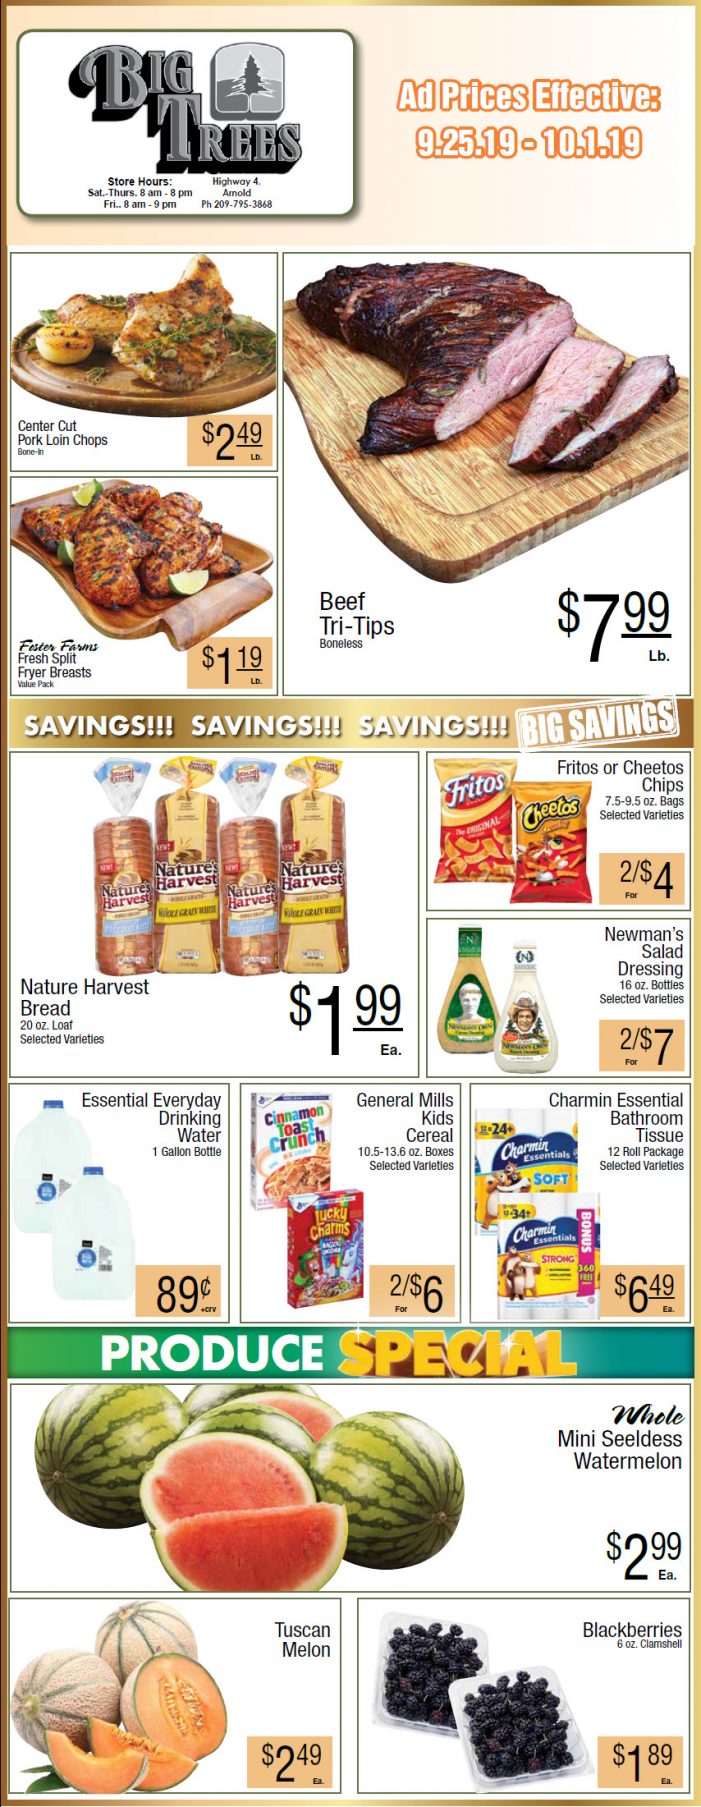 Big Trees Market Weekly Ad & Grocery Specials Through October 1st!